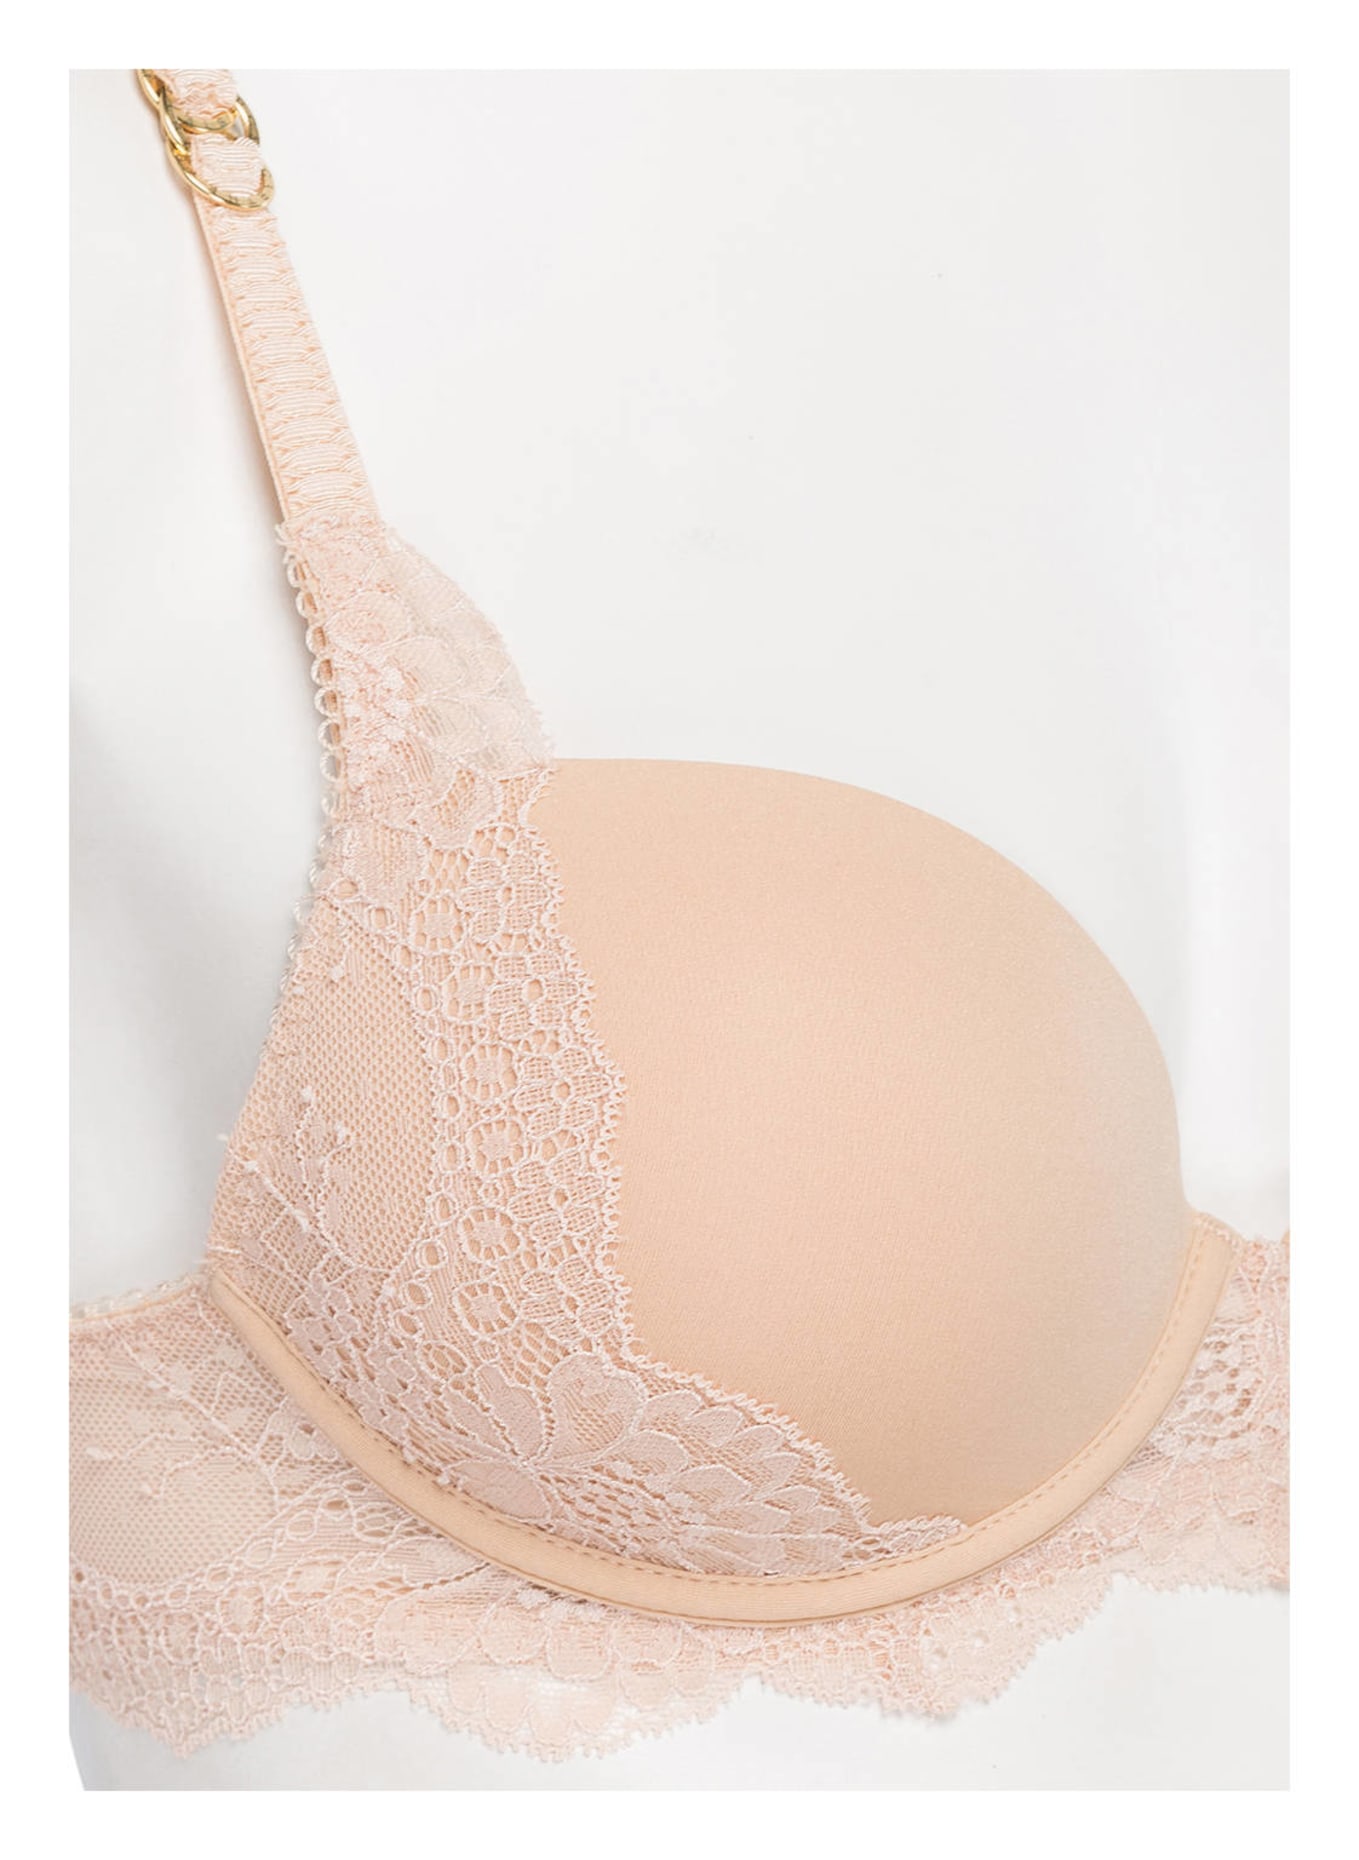 STELLA McCARTNEY LINGERIE Push-up-BH SMOOTH & LACE, Farbe: NUDE (Bild 4)